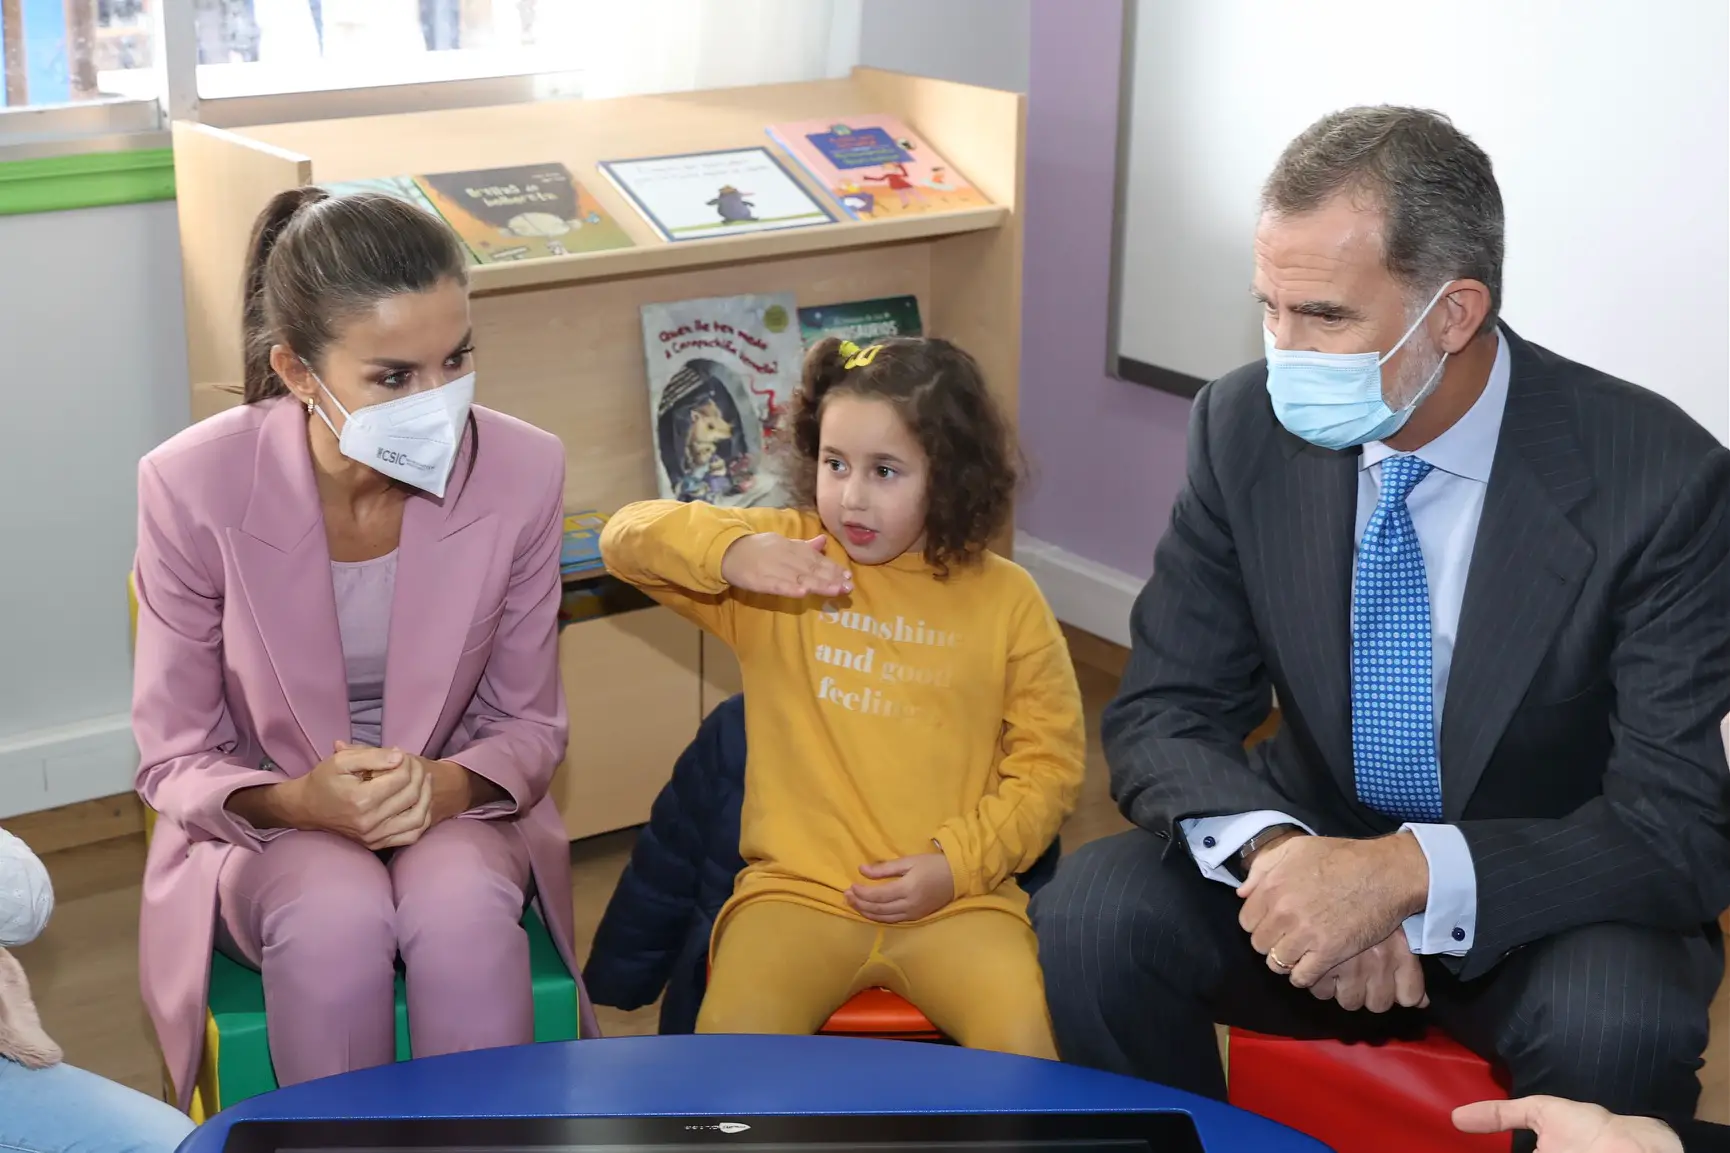 King Felipe and Queen Letizia presented ‘School of the Year 2020 Award’